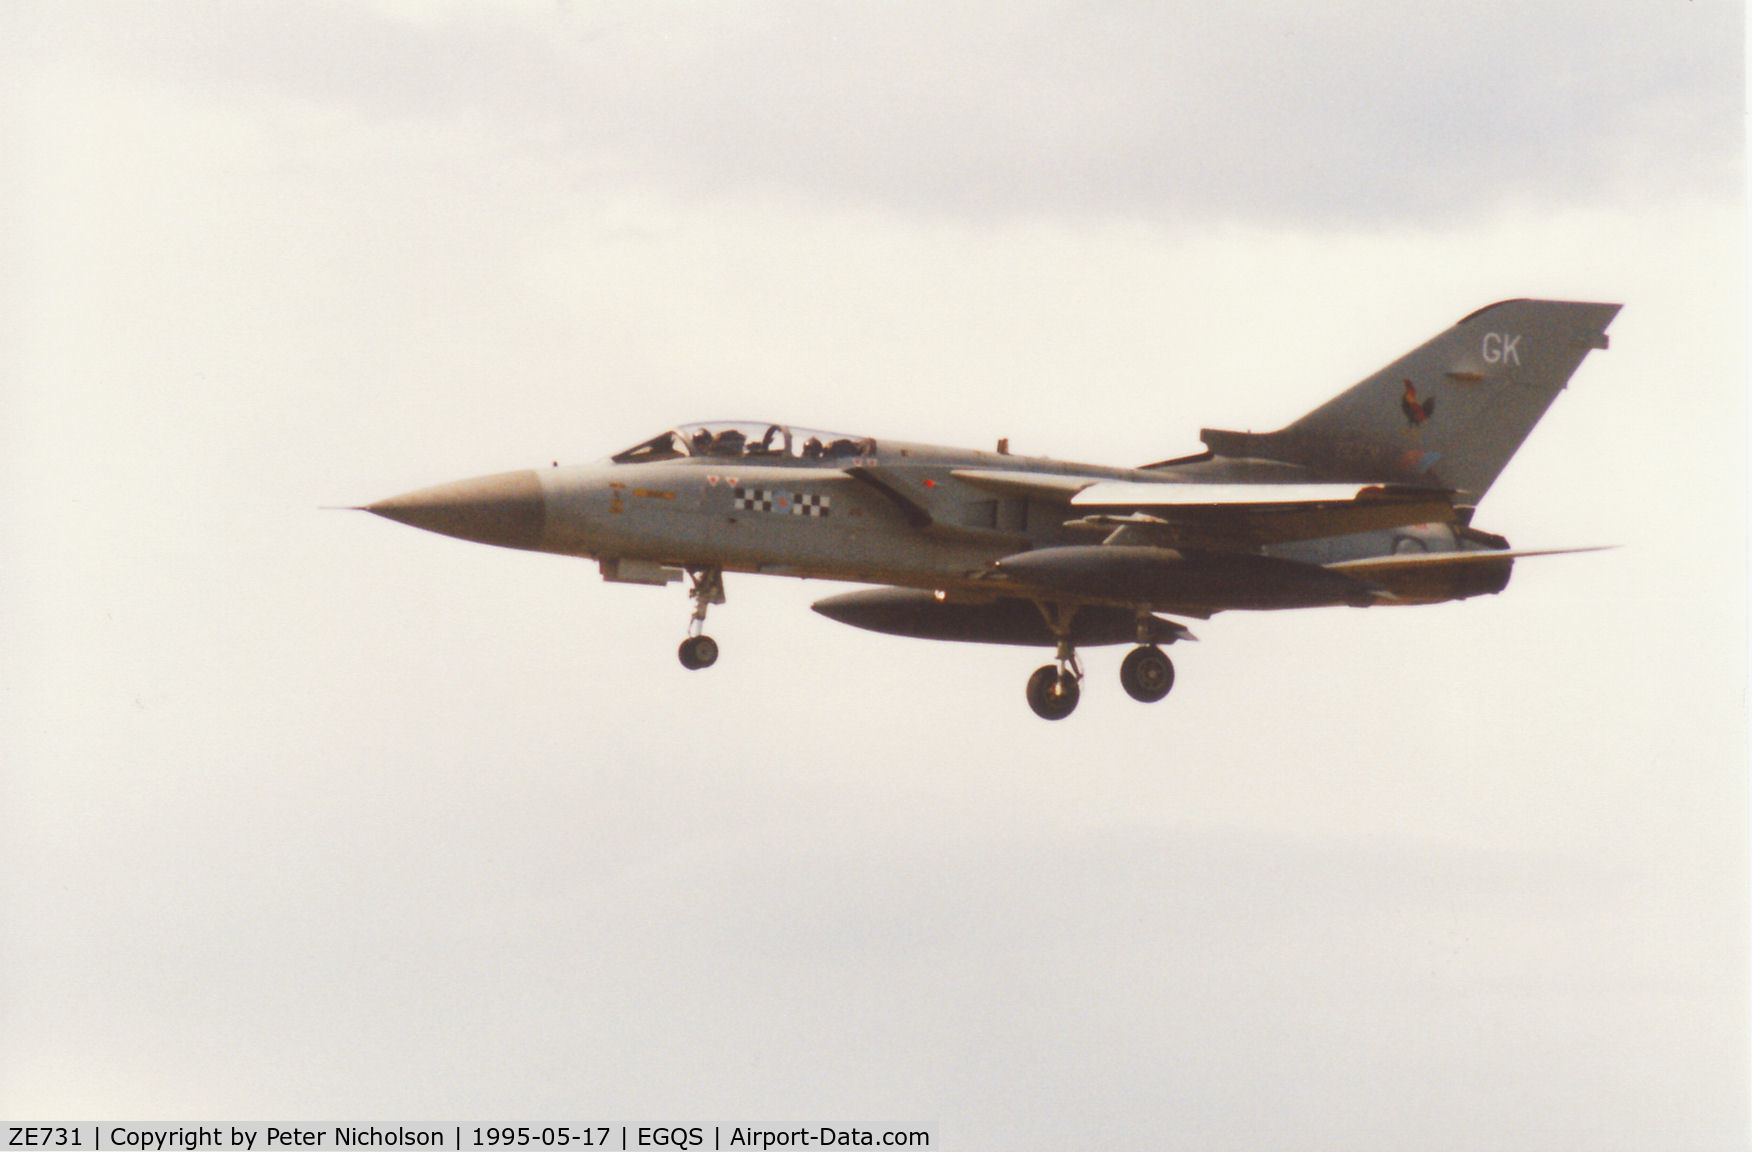 ZE731, 1987 Panavia Tornado F.3 C/N 658/AS047/3293, Tornado F.3 of 43 Squadron at RAF Leuchars on final approach to Runway 23 at RAF Lossiemouth in May 1995.